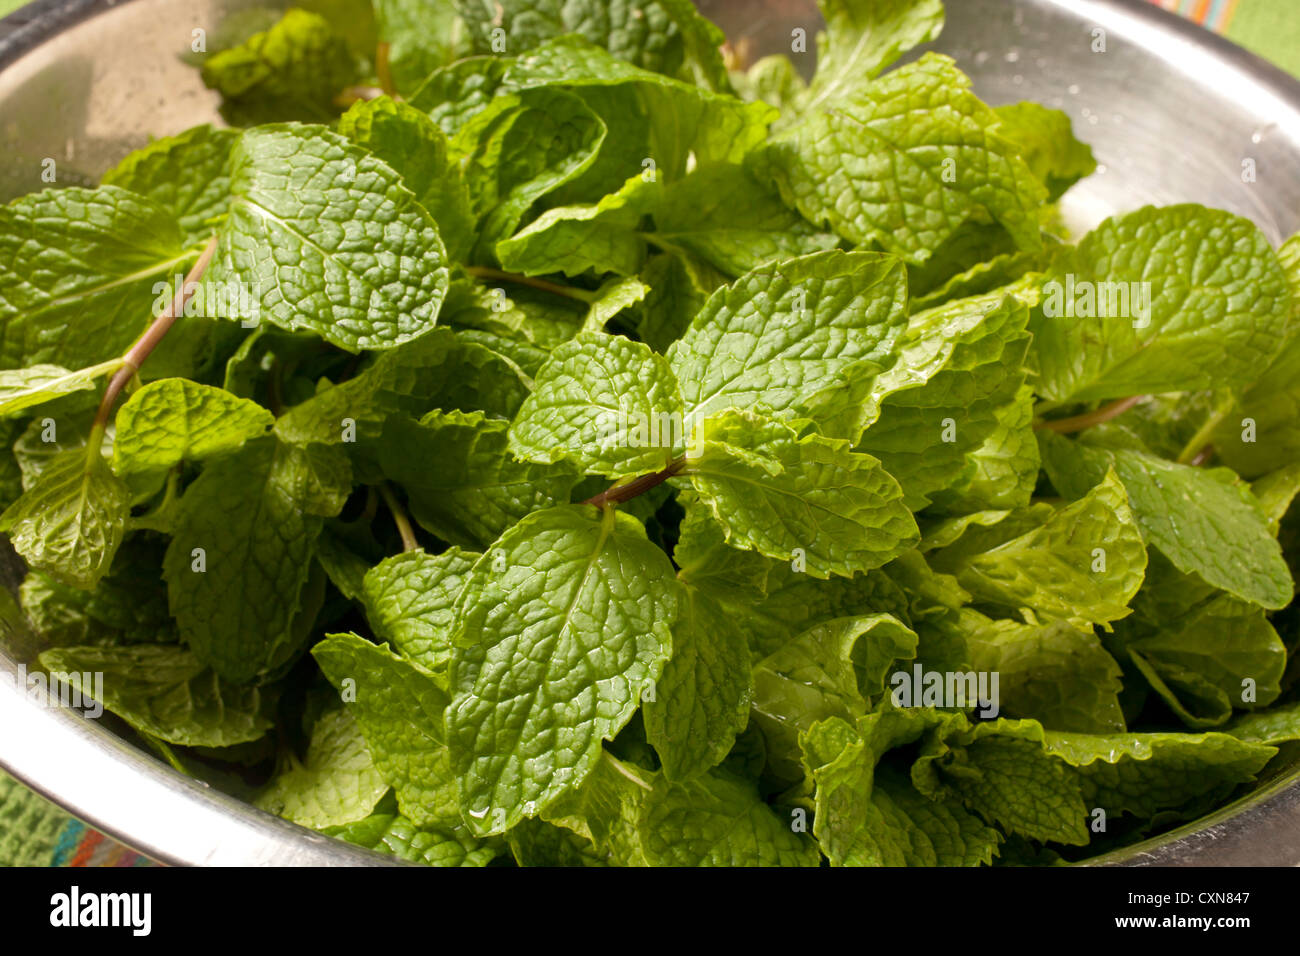 Bunch of fresh mint leaves Stock Photo